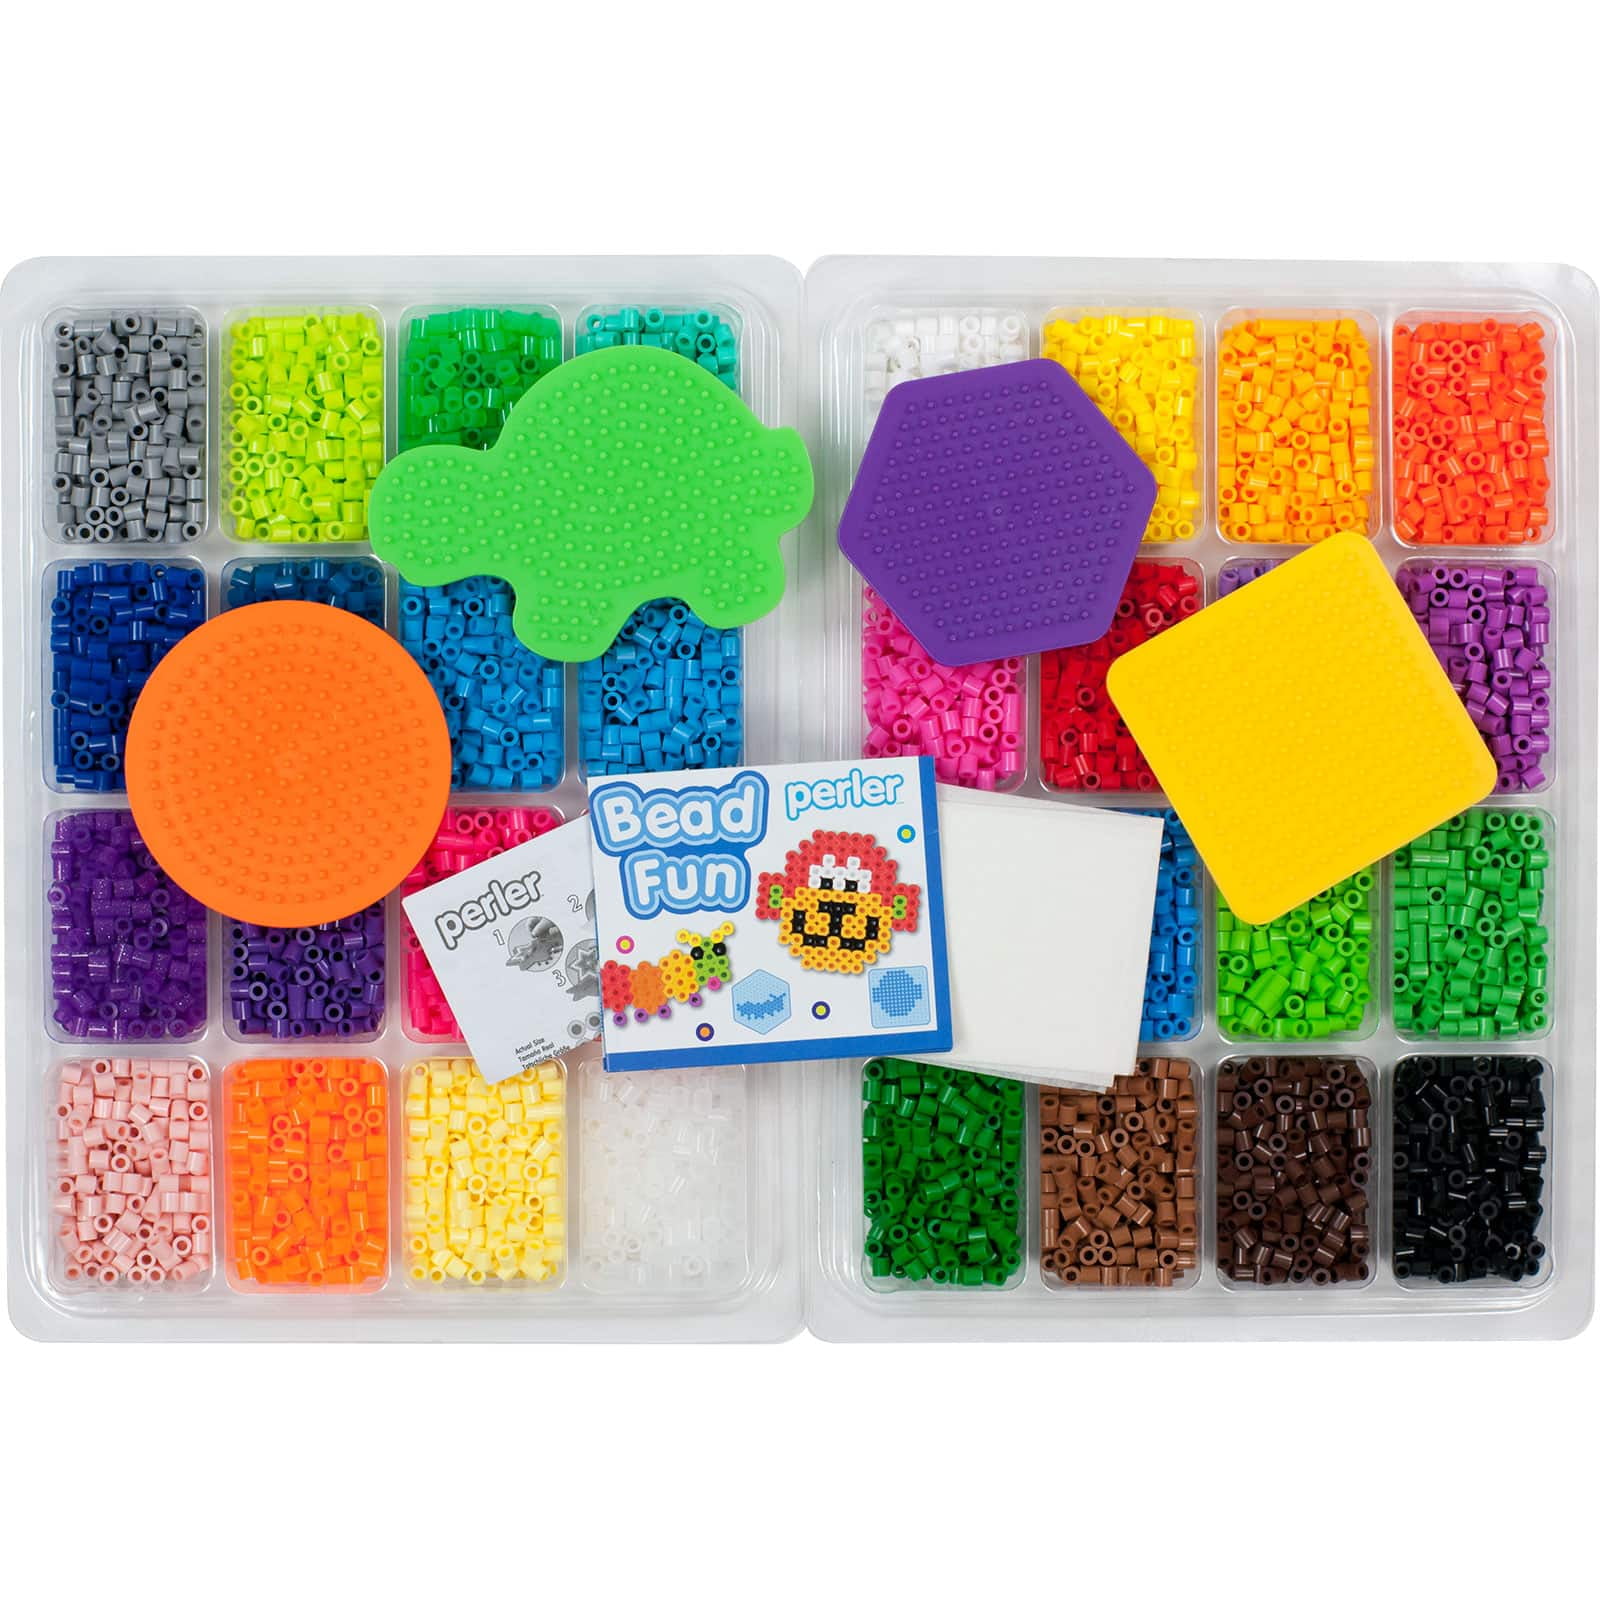 Perler - Creative Kid Kit - Funfusion Fused Bead Kit - Deluxe Box Beads for  6 Plus - 17 Projects - 5000 Beads - Kids Toys